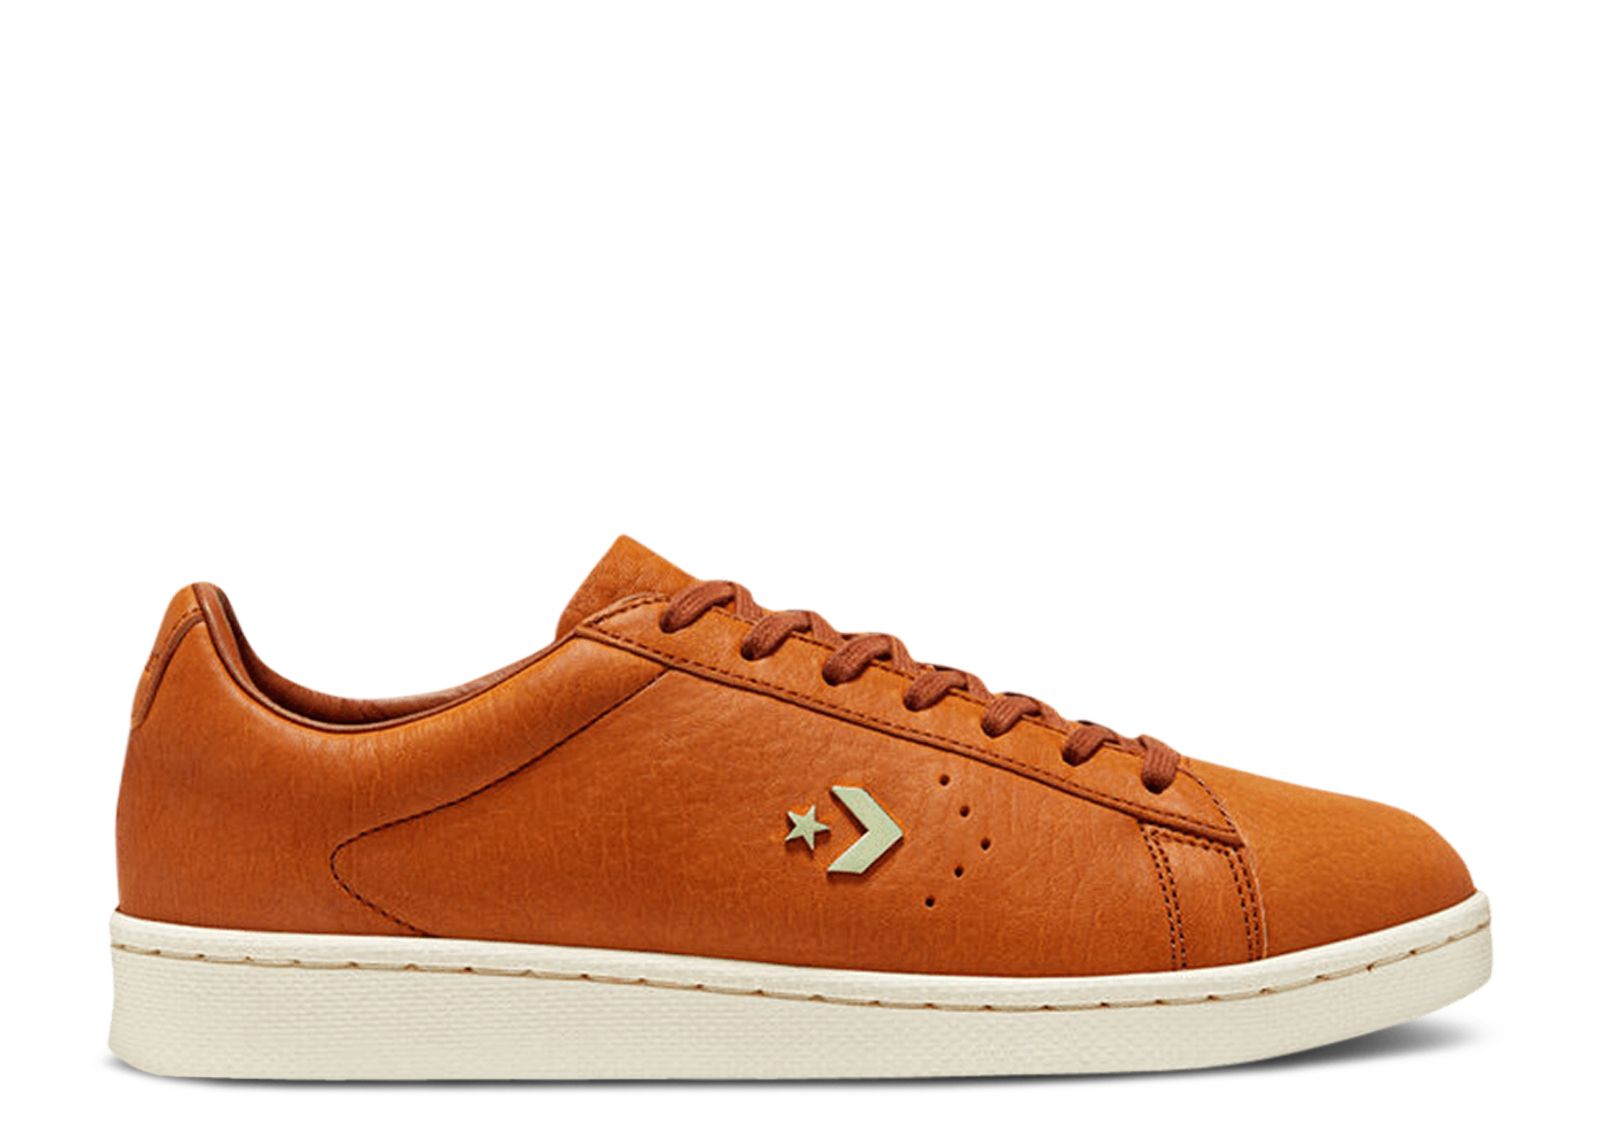 Кроссовки Converse Horween Leather Co. X Pro Leather Low 'Potters Clay', коричневый solar wave low leather